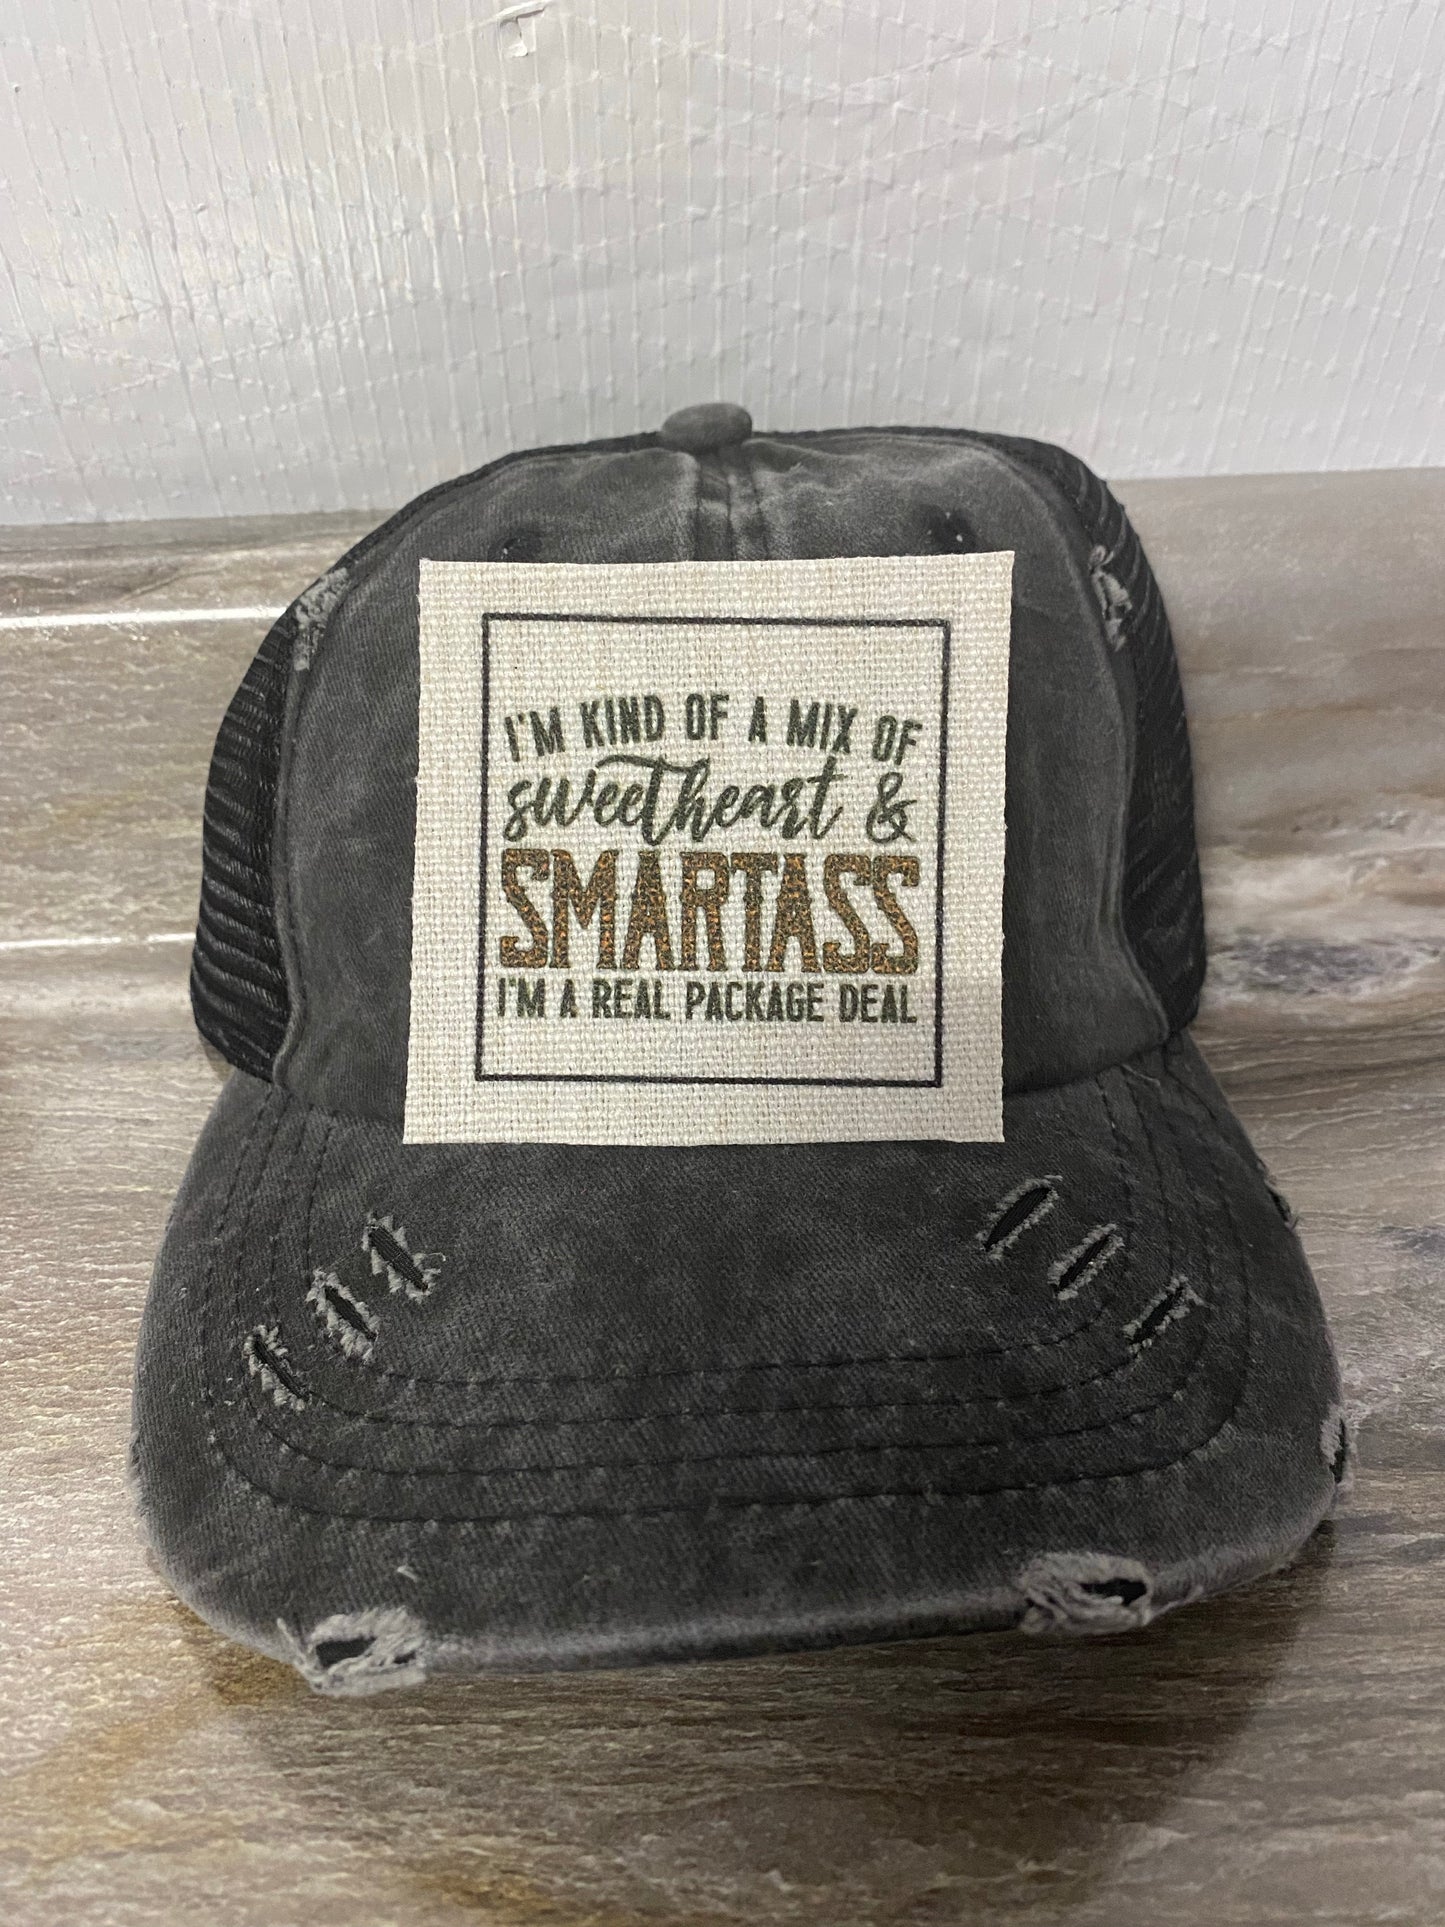 Mix of Sweetheart & Smartass Hat Patch